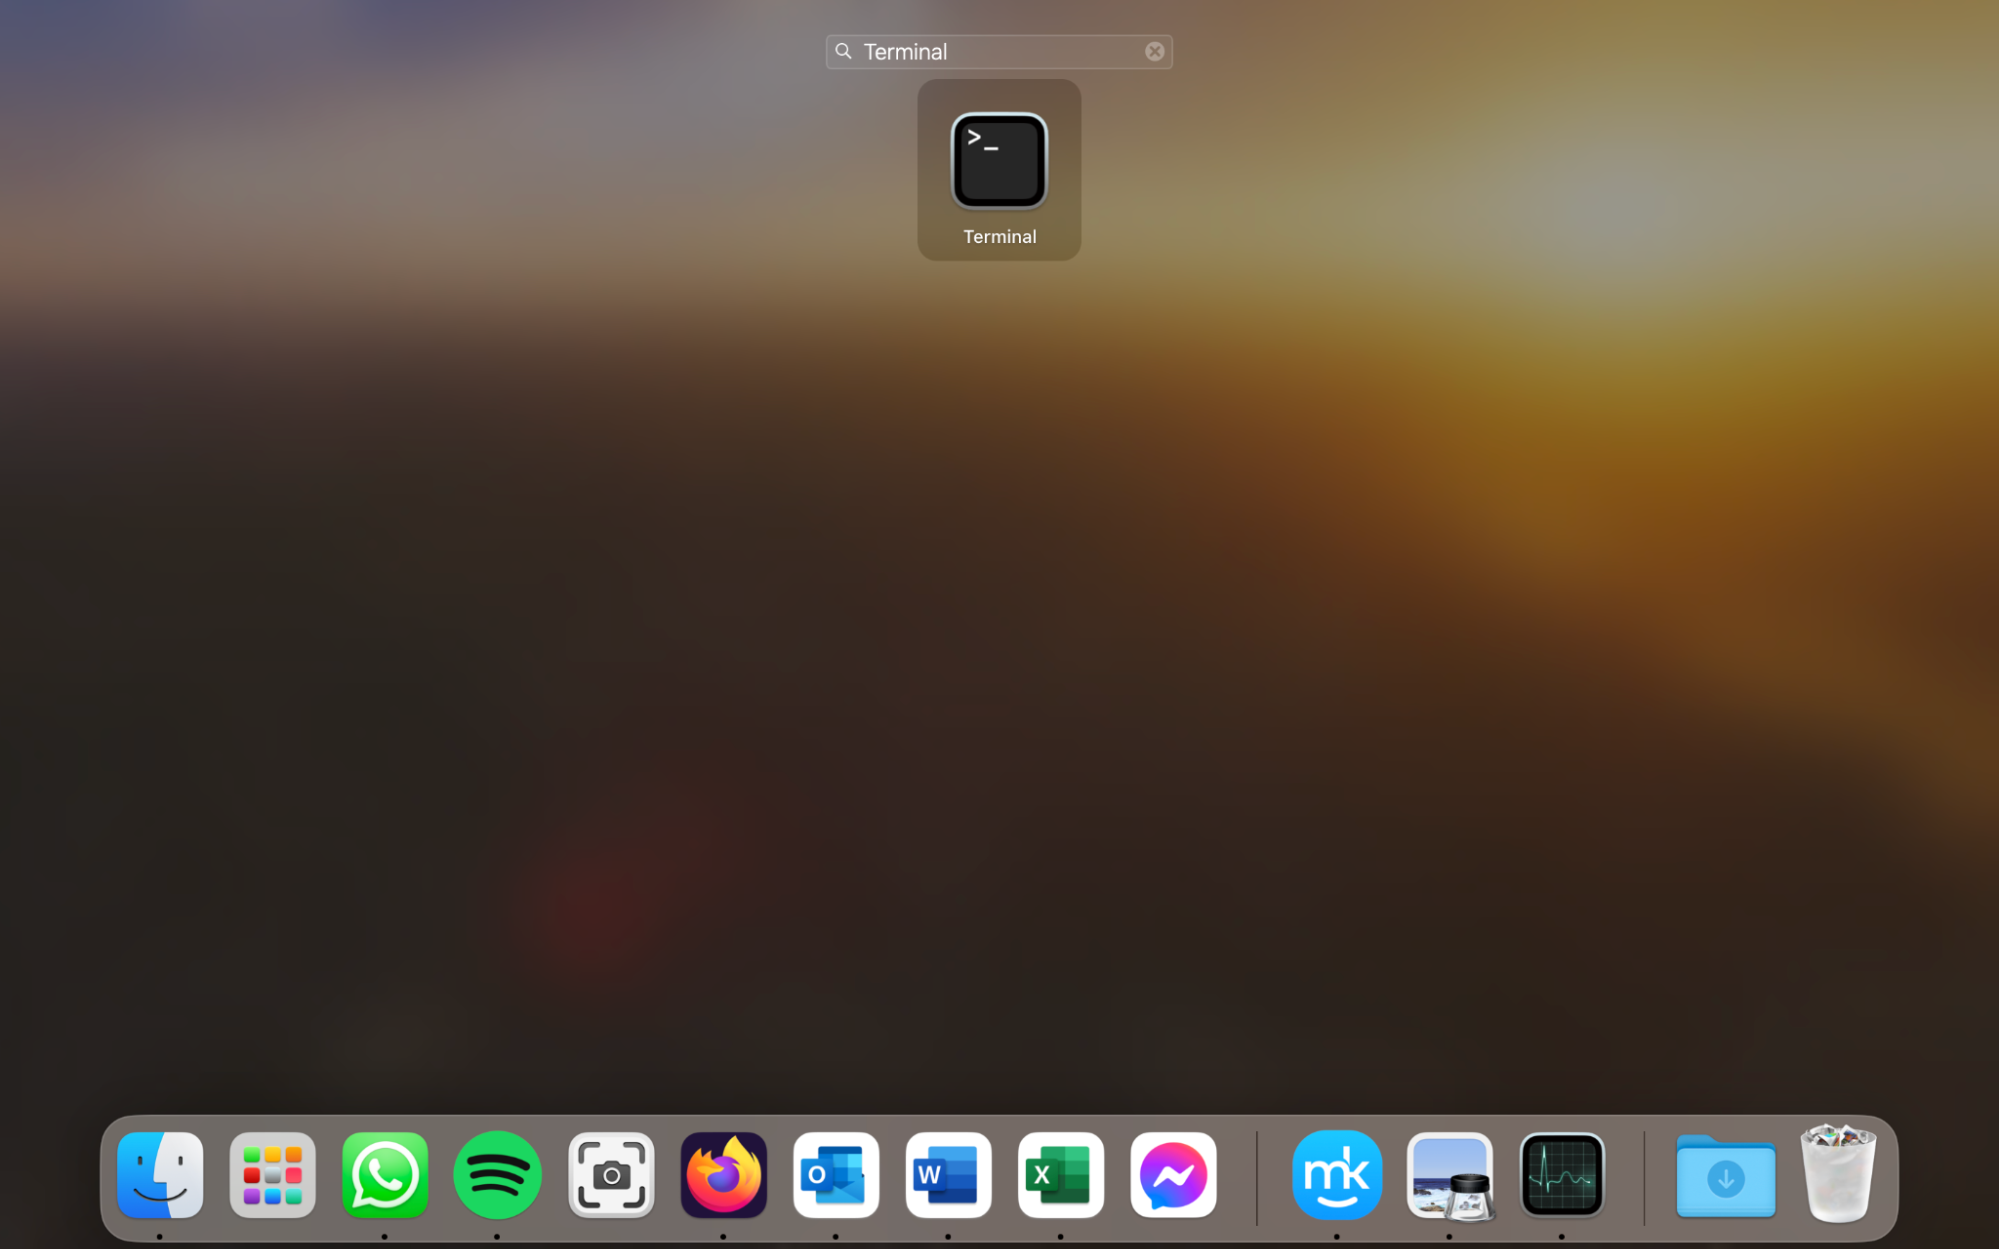 Mac’s Launchpad, with Terminal shown, along with the search bar and Dock. How to manually remove a browser hijacker from Mac: clear the system DNS cache.